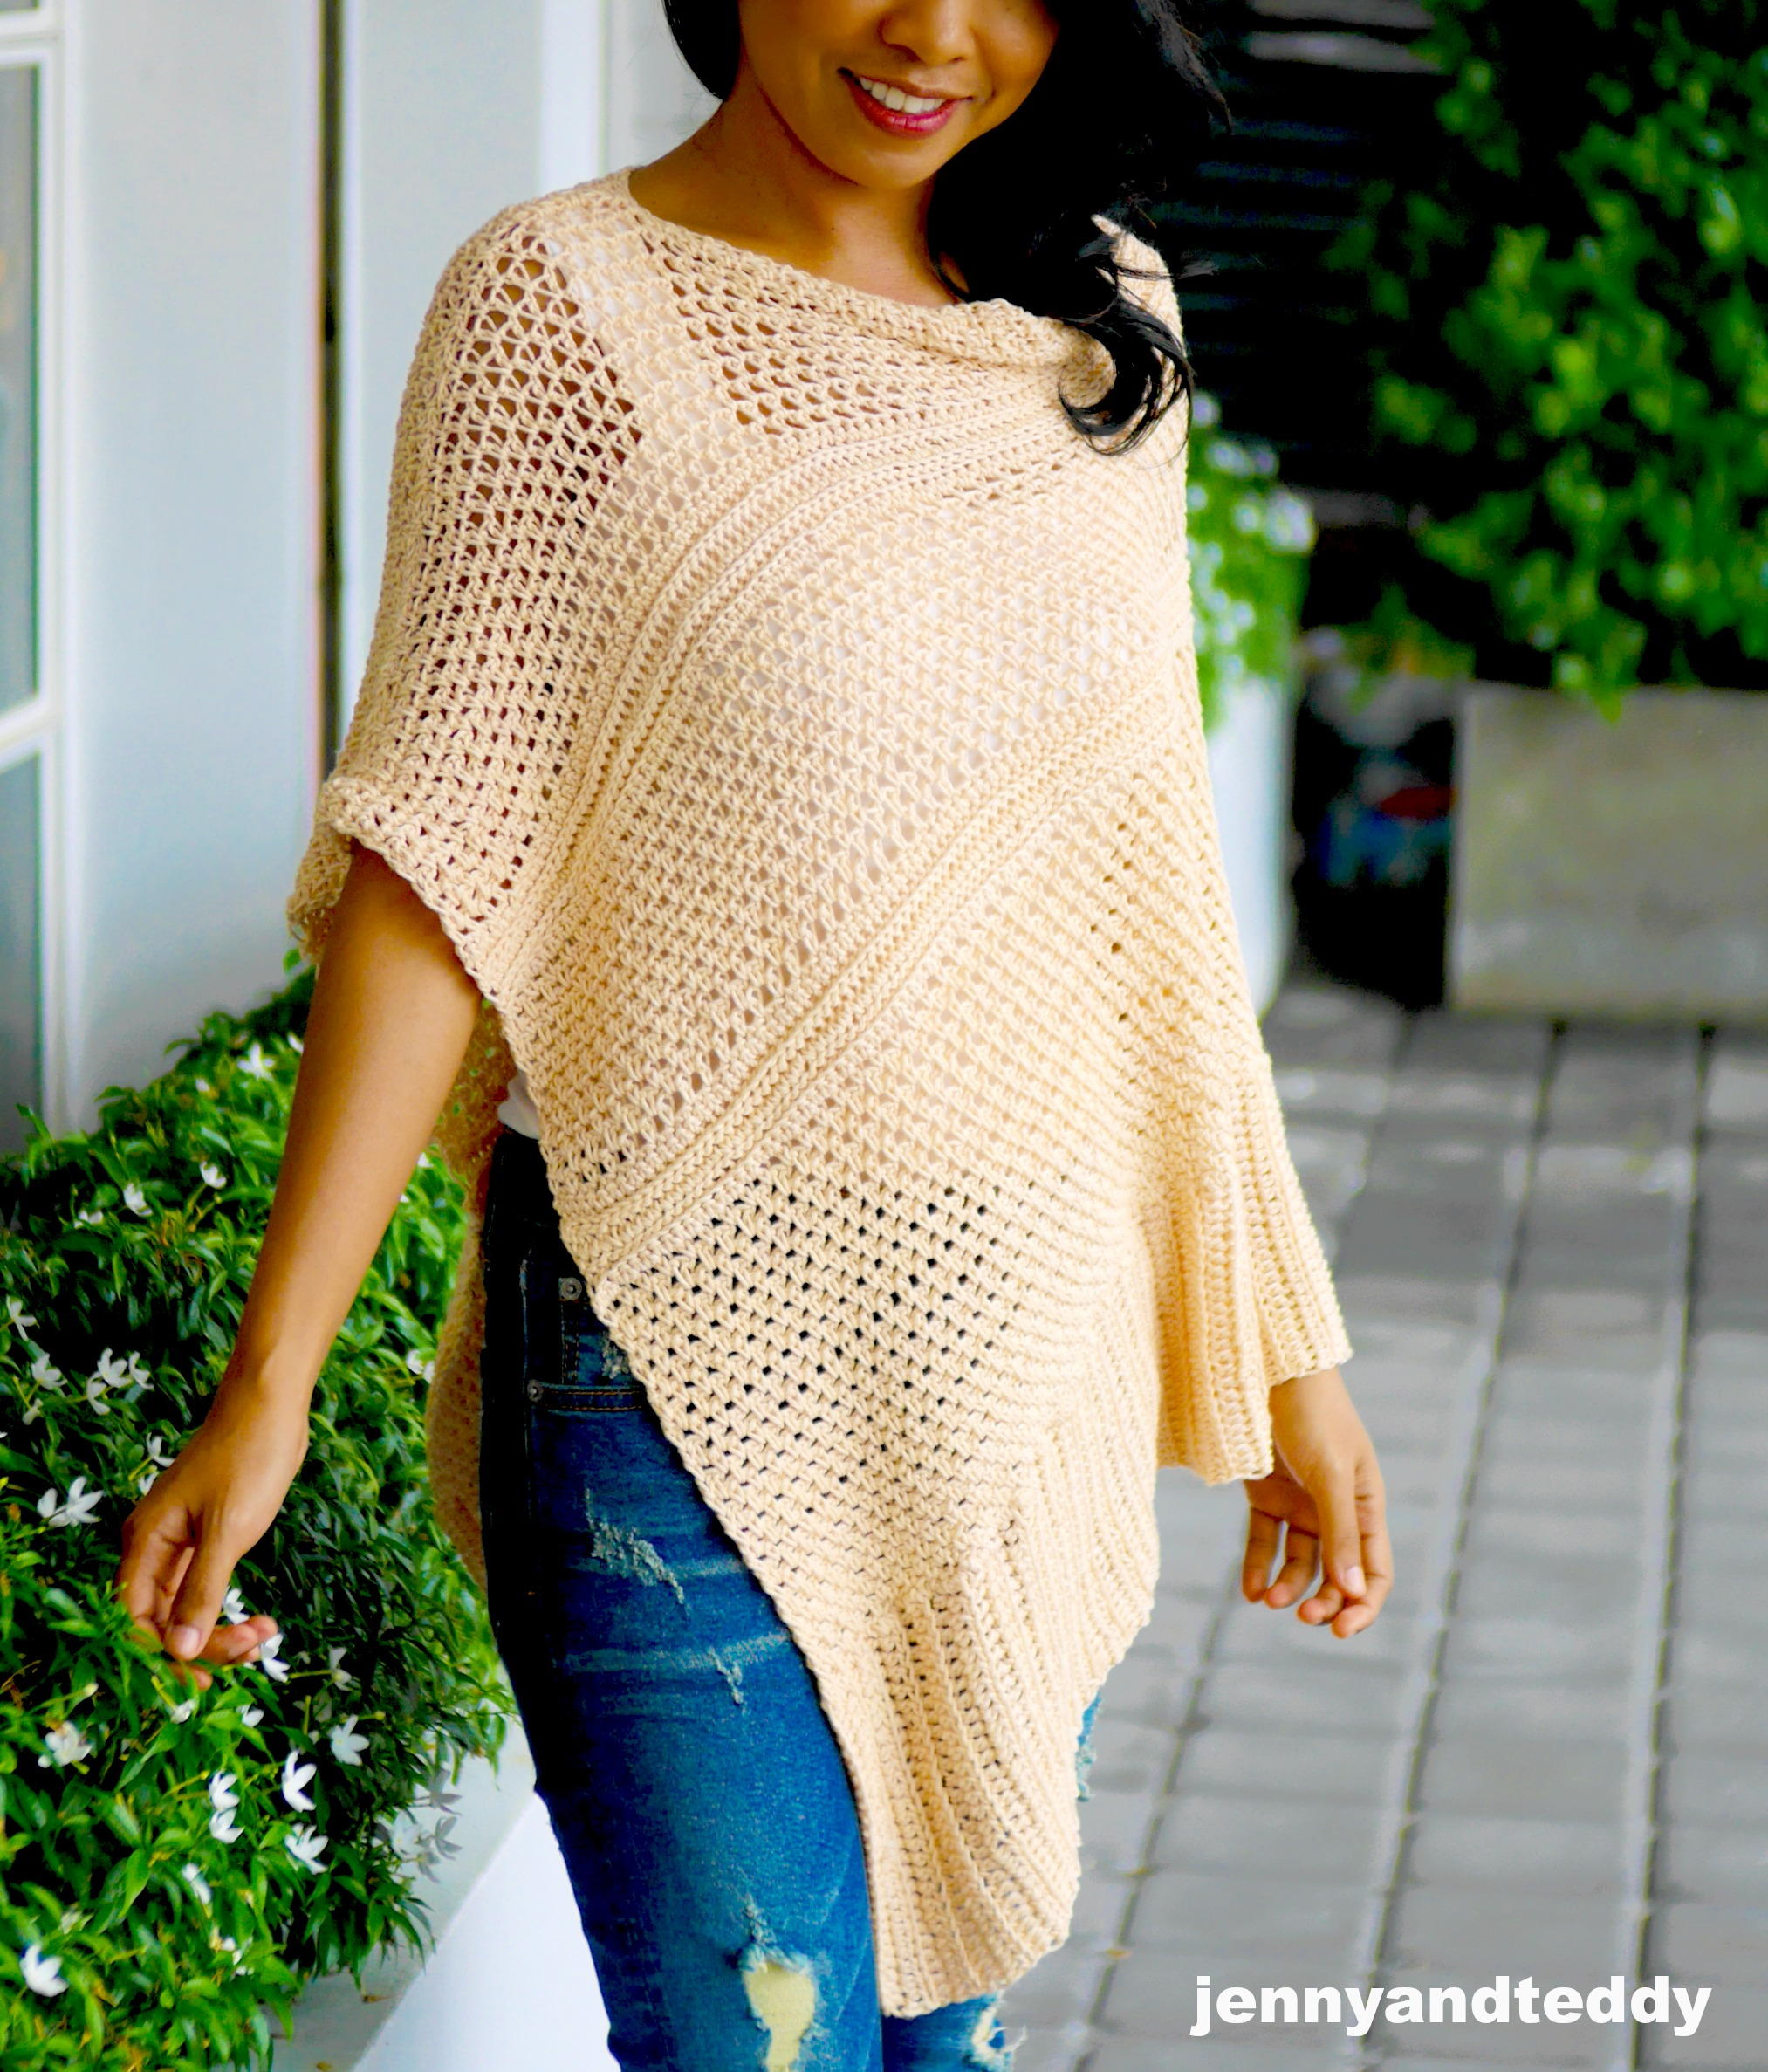 Did You Know You Could Make A Poncho Look Cute? - BLONDIE IN THE CITY